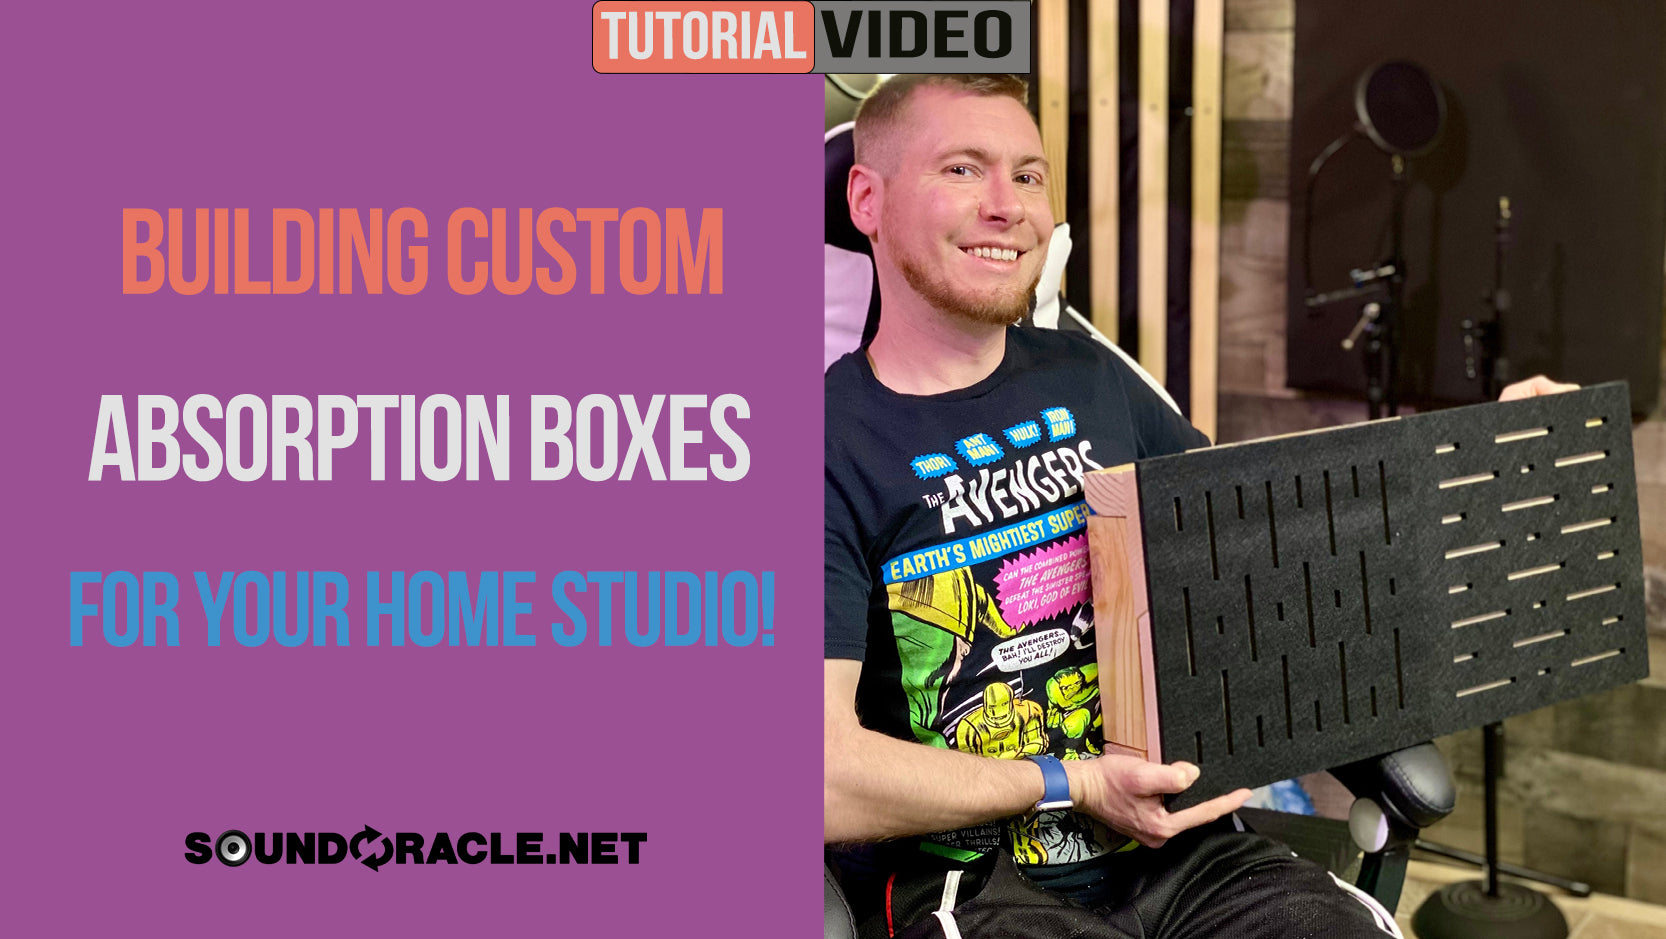 Building Custom Absorption Boxes For Your Home Studio!